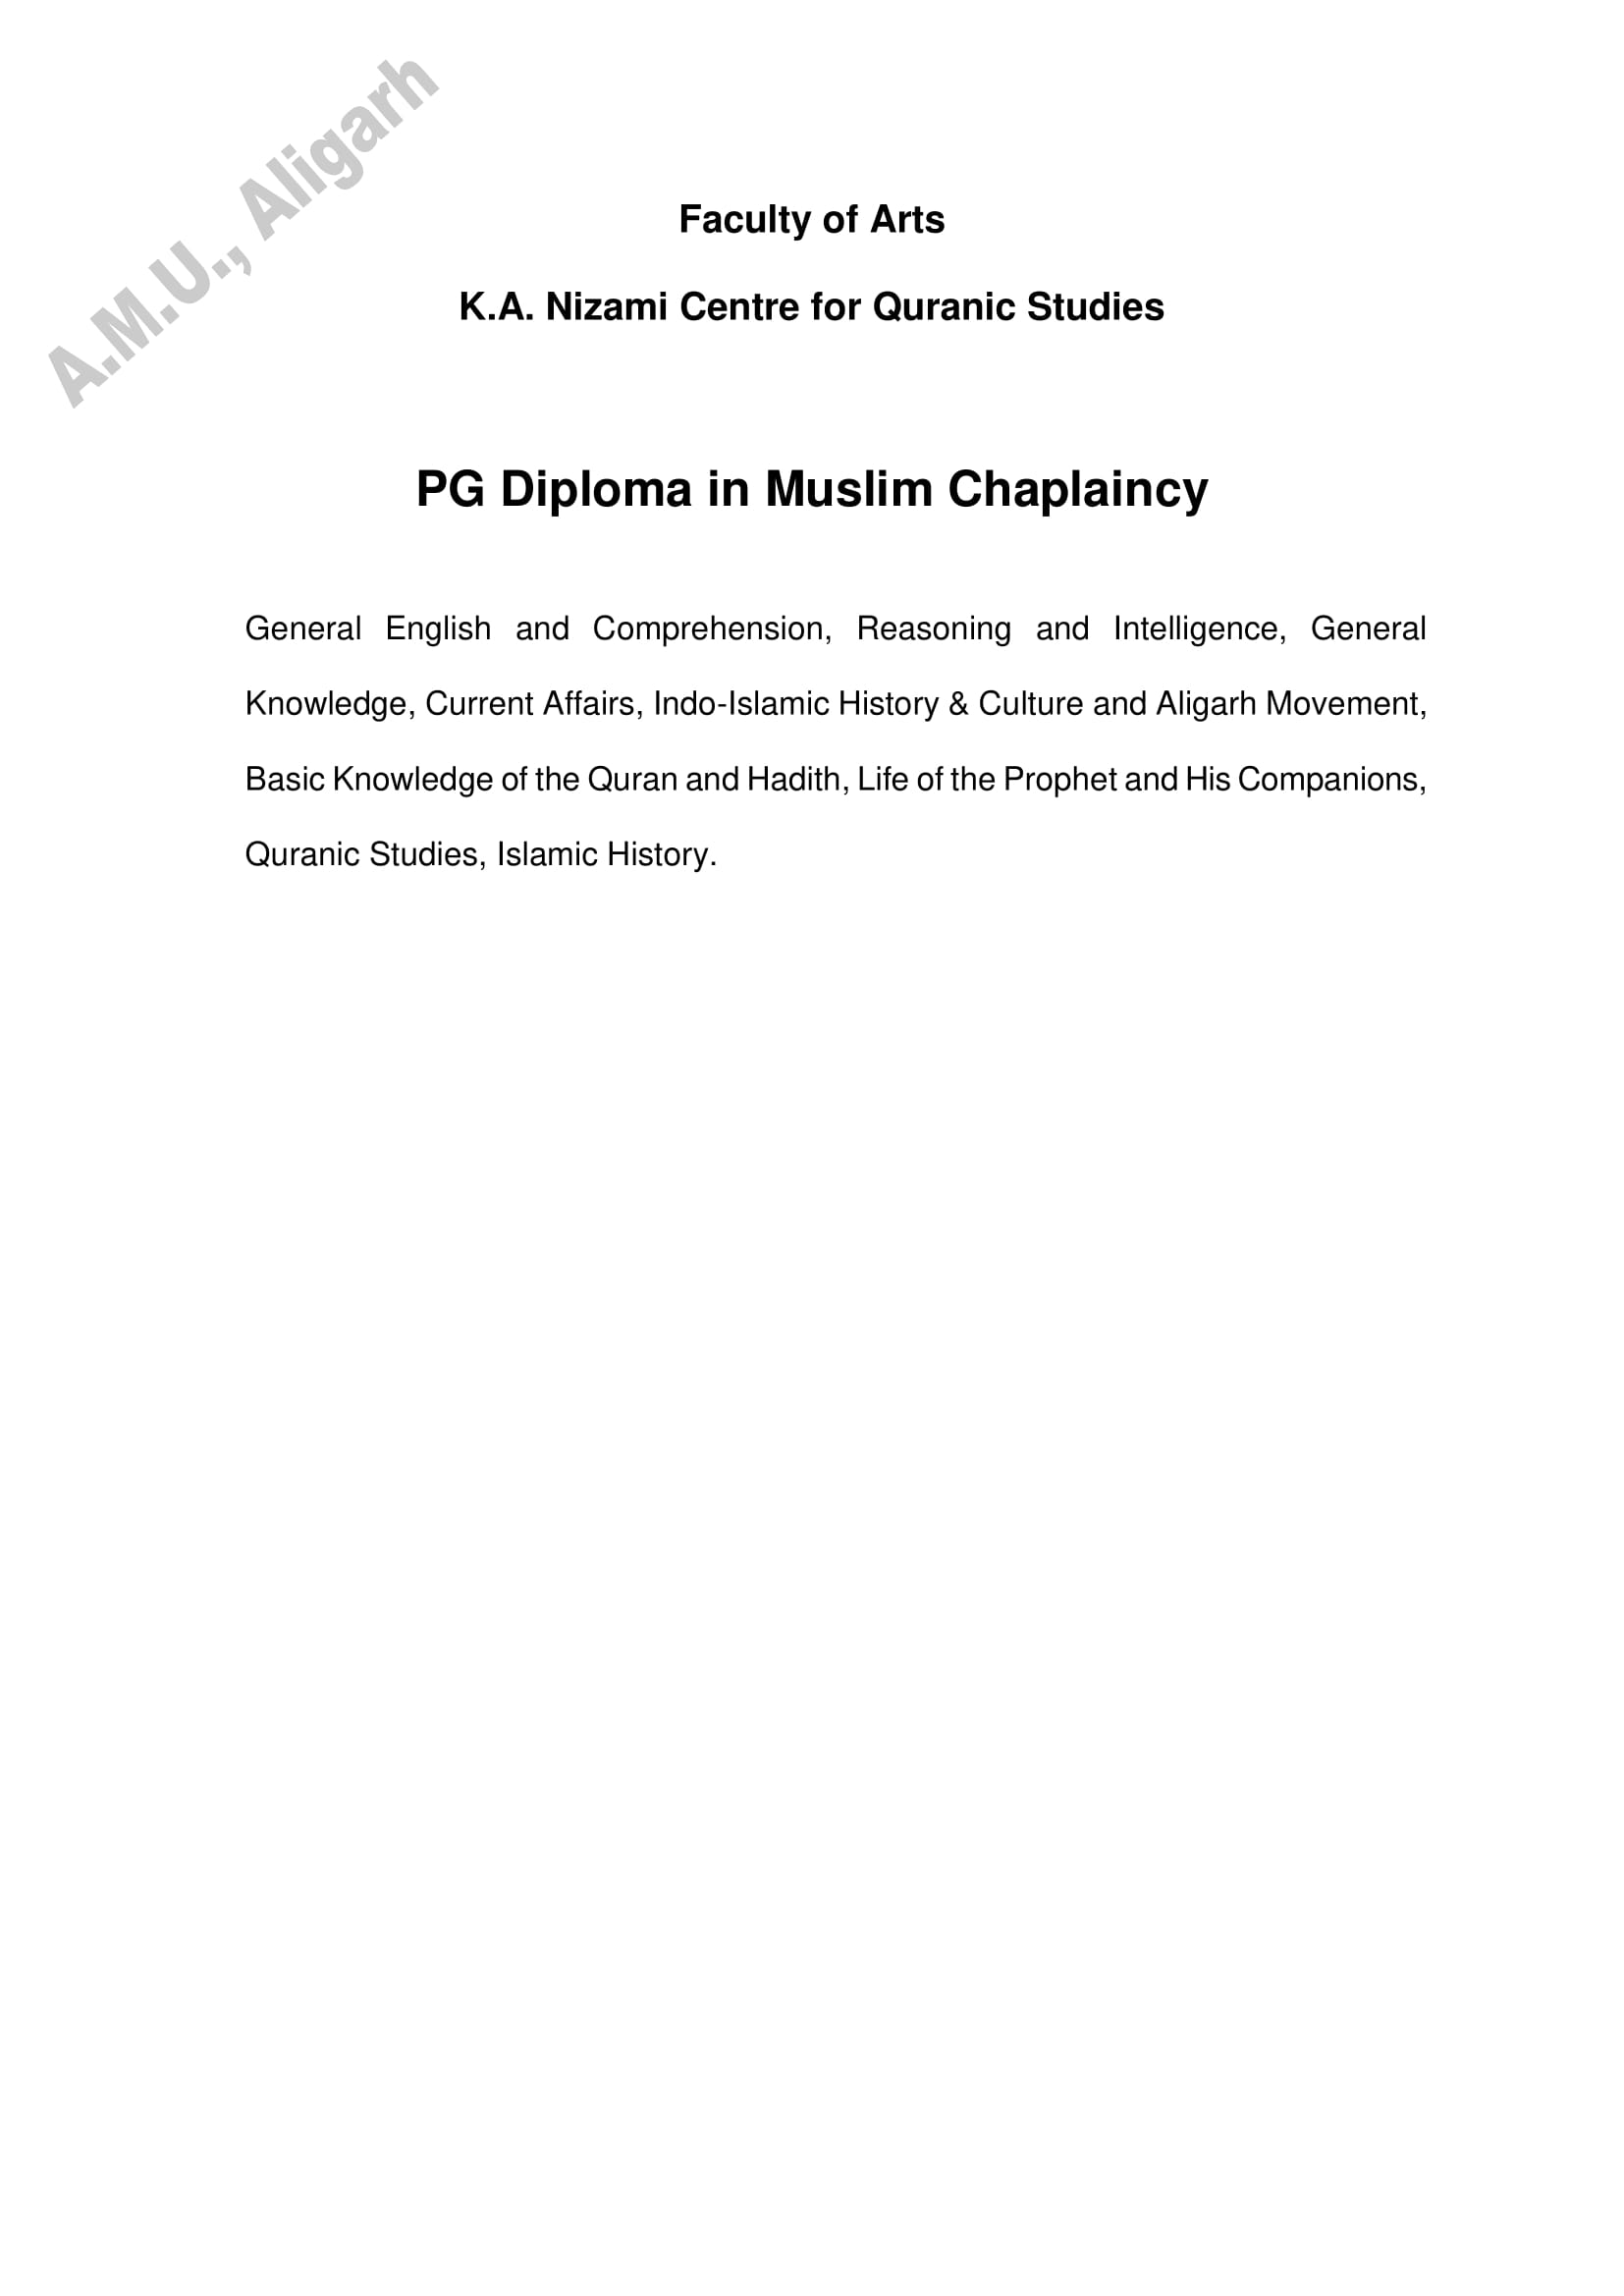 AMU Entrance Exam Syllabus for PG Diploma in Muslim Chaplaincy - Page 1